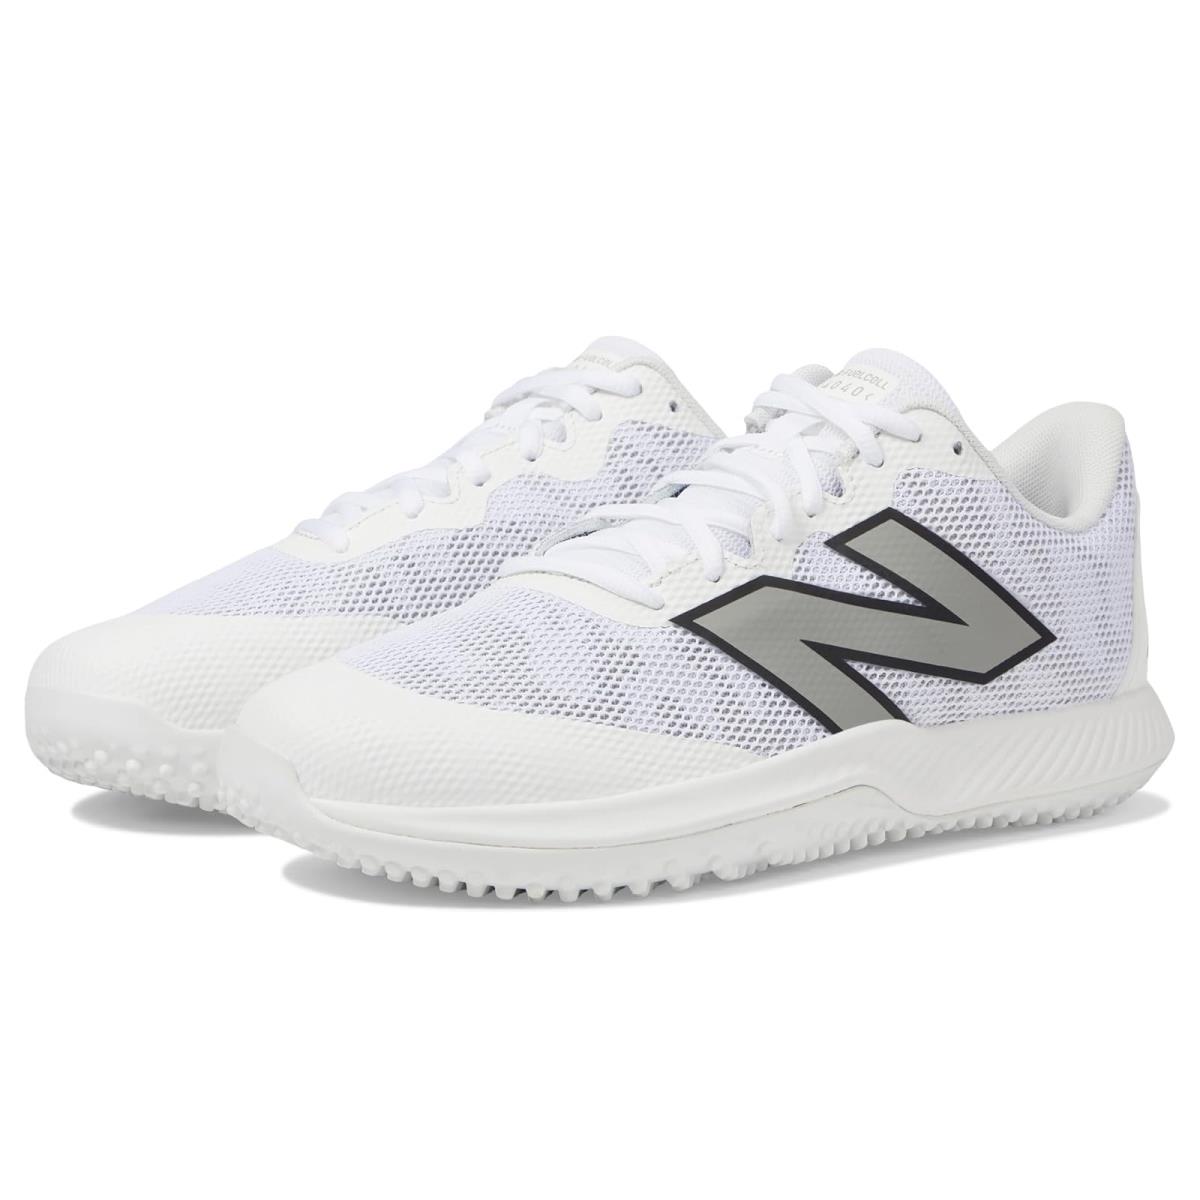 Unisex Sneakers Athletic Shoes New Balance Fuelcell 4040v7 Turf Trainer Optic White/Rain Cloud